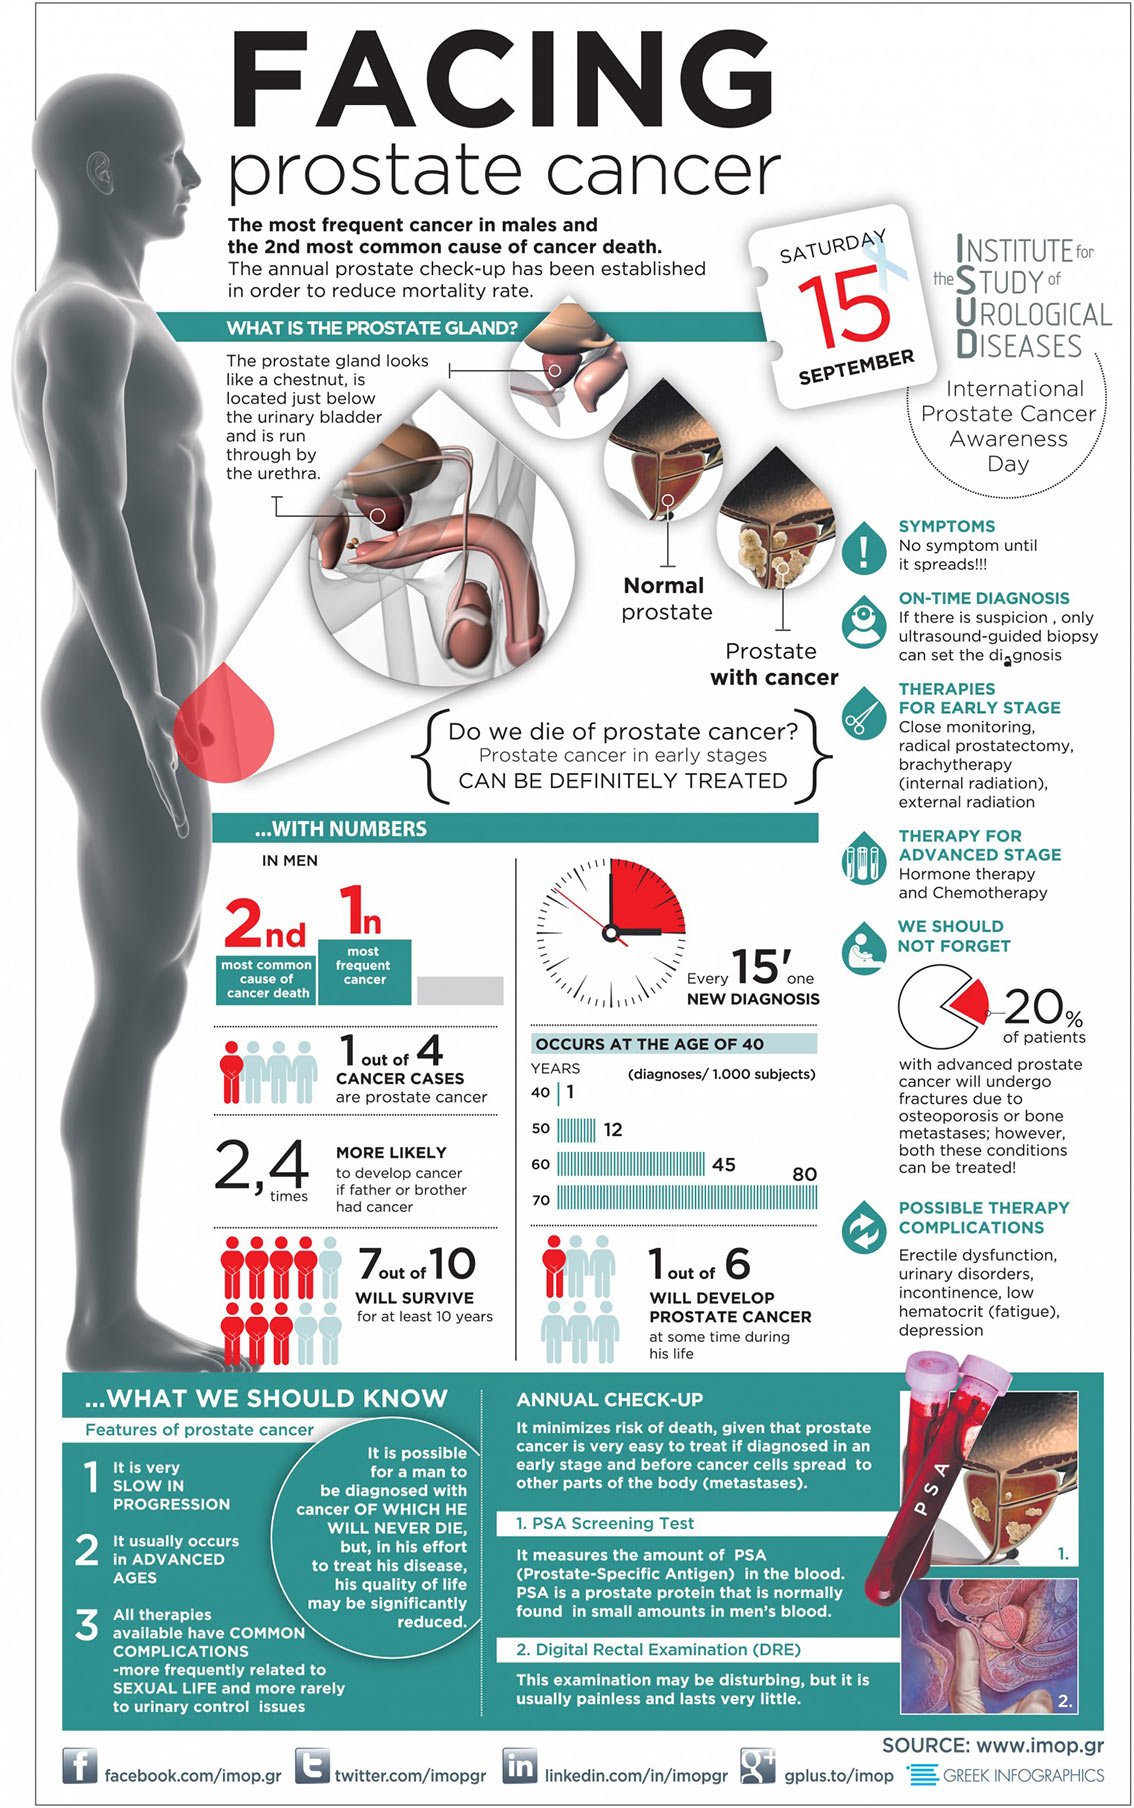 Prostate Cancer: Facts and Statistics [Infographic]